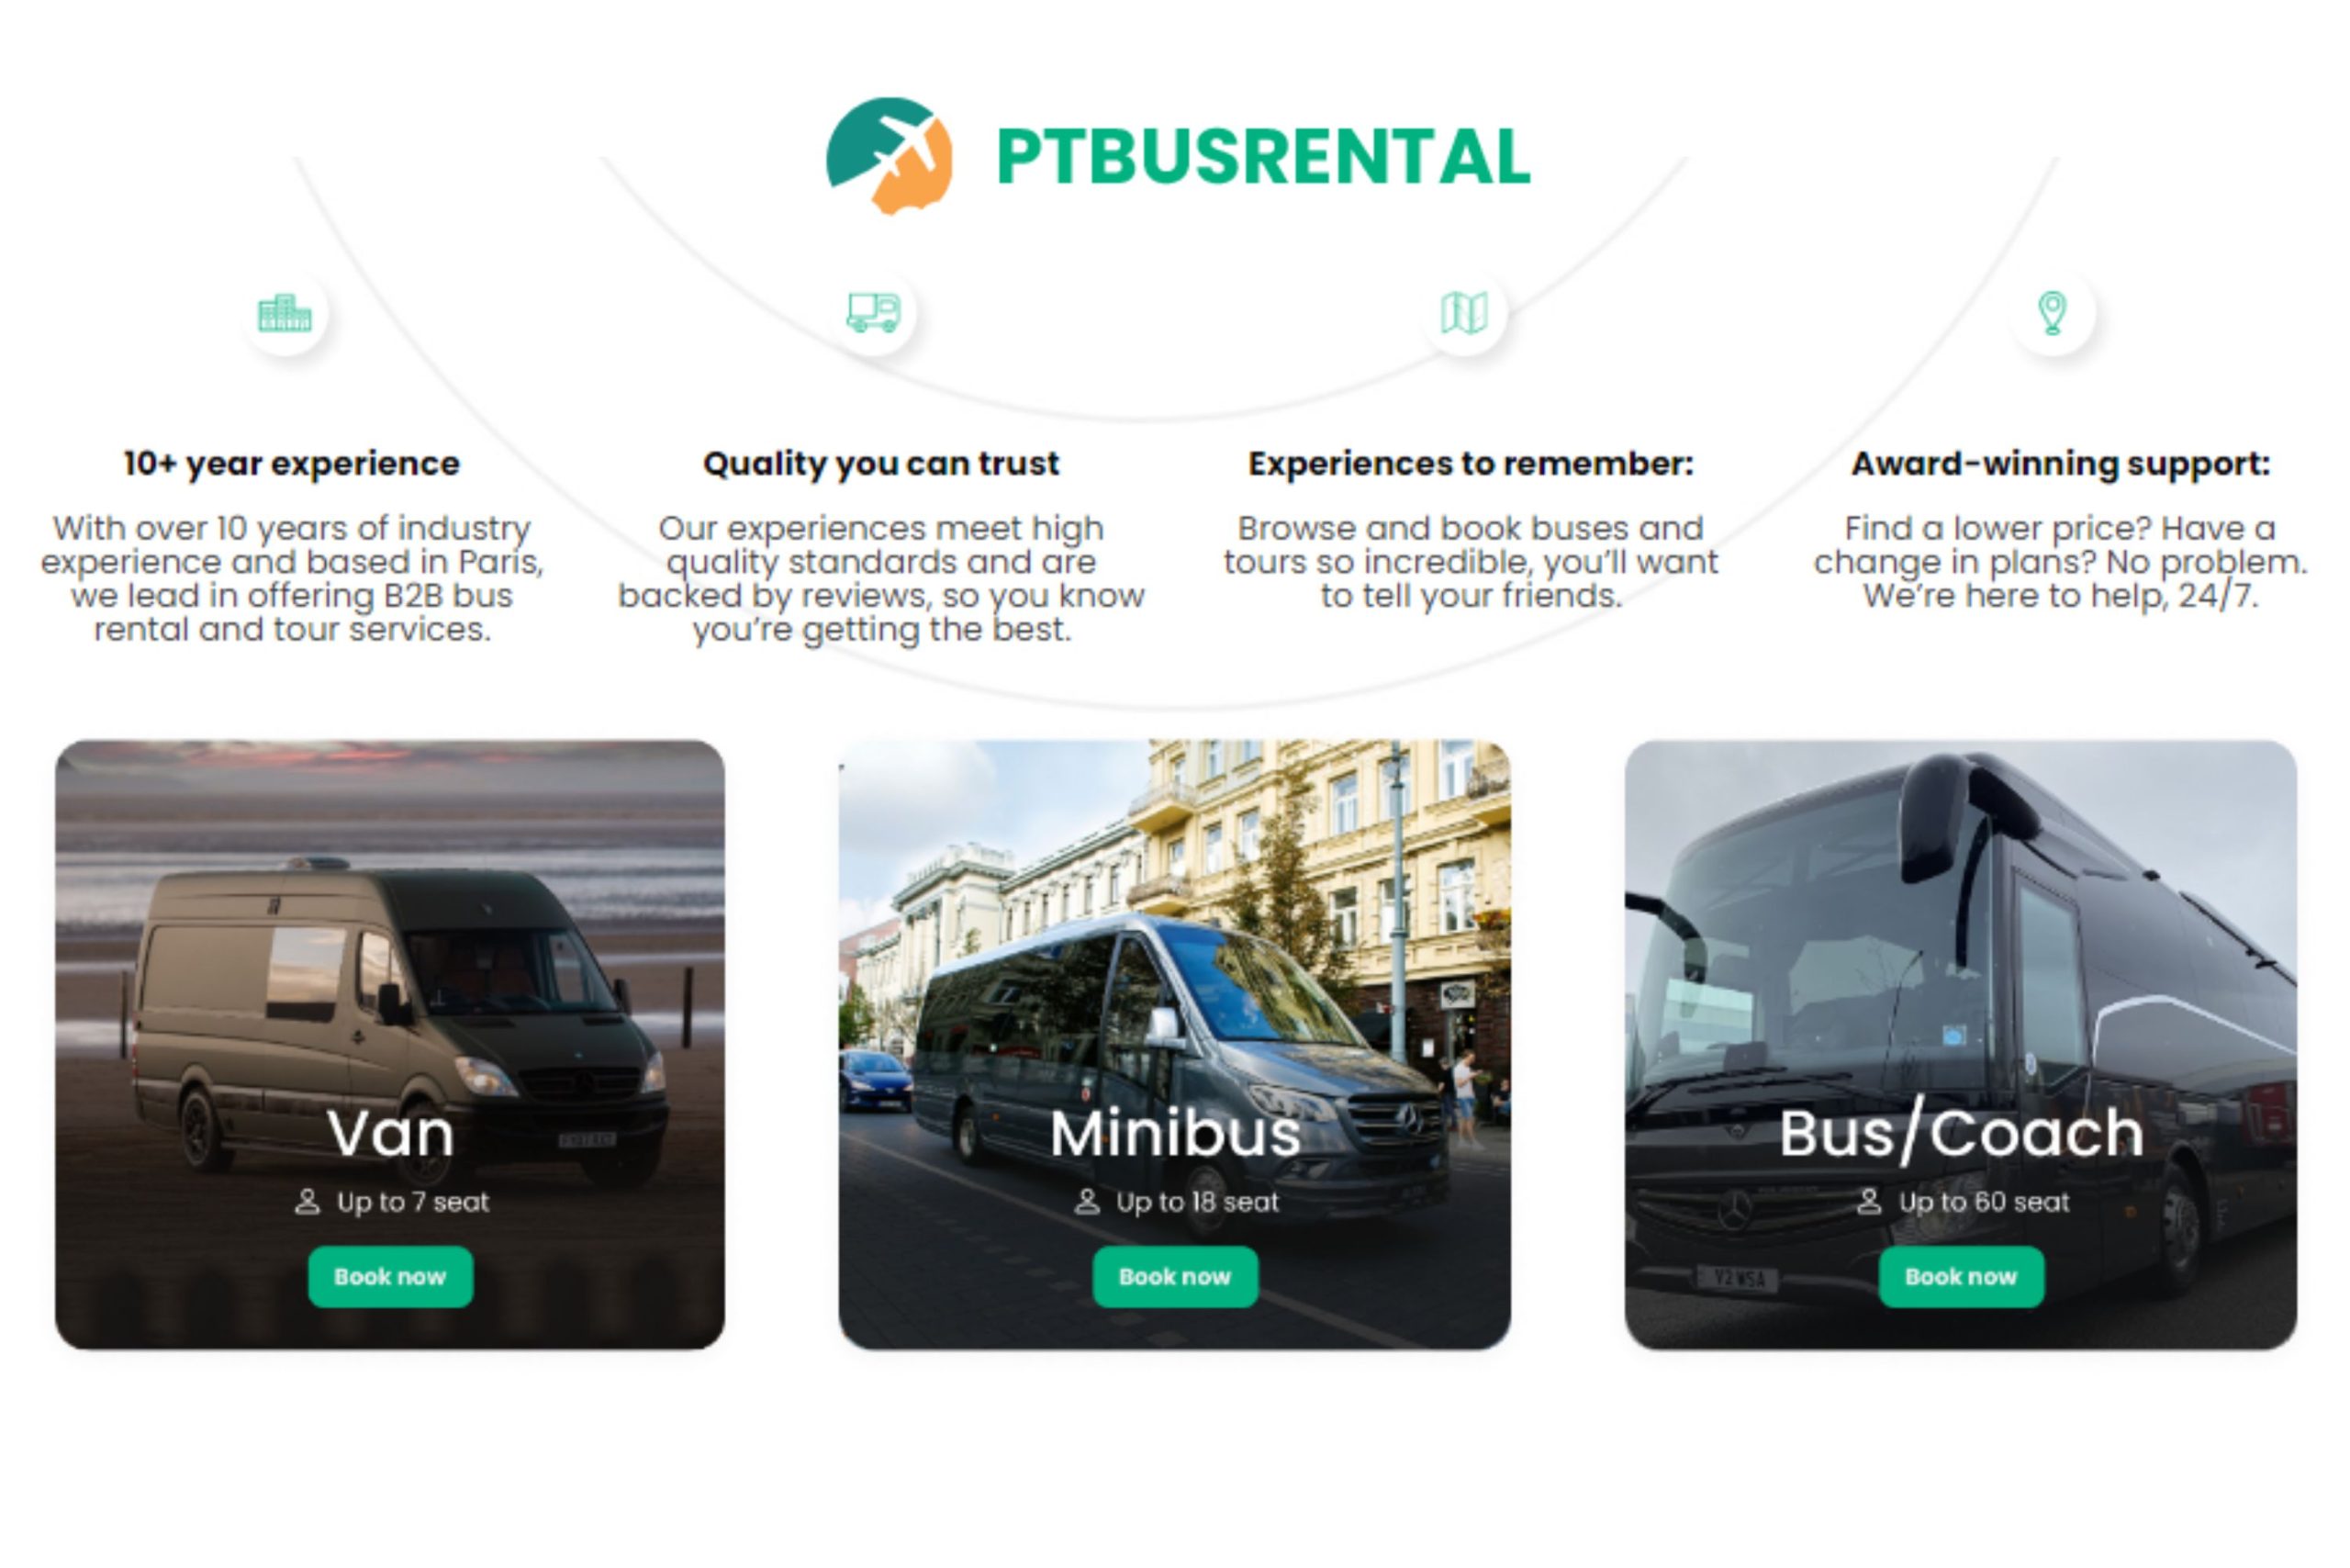 Travel Europe with ease with PTBusrental